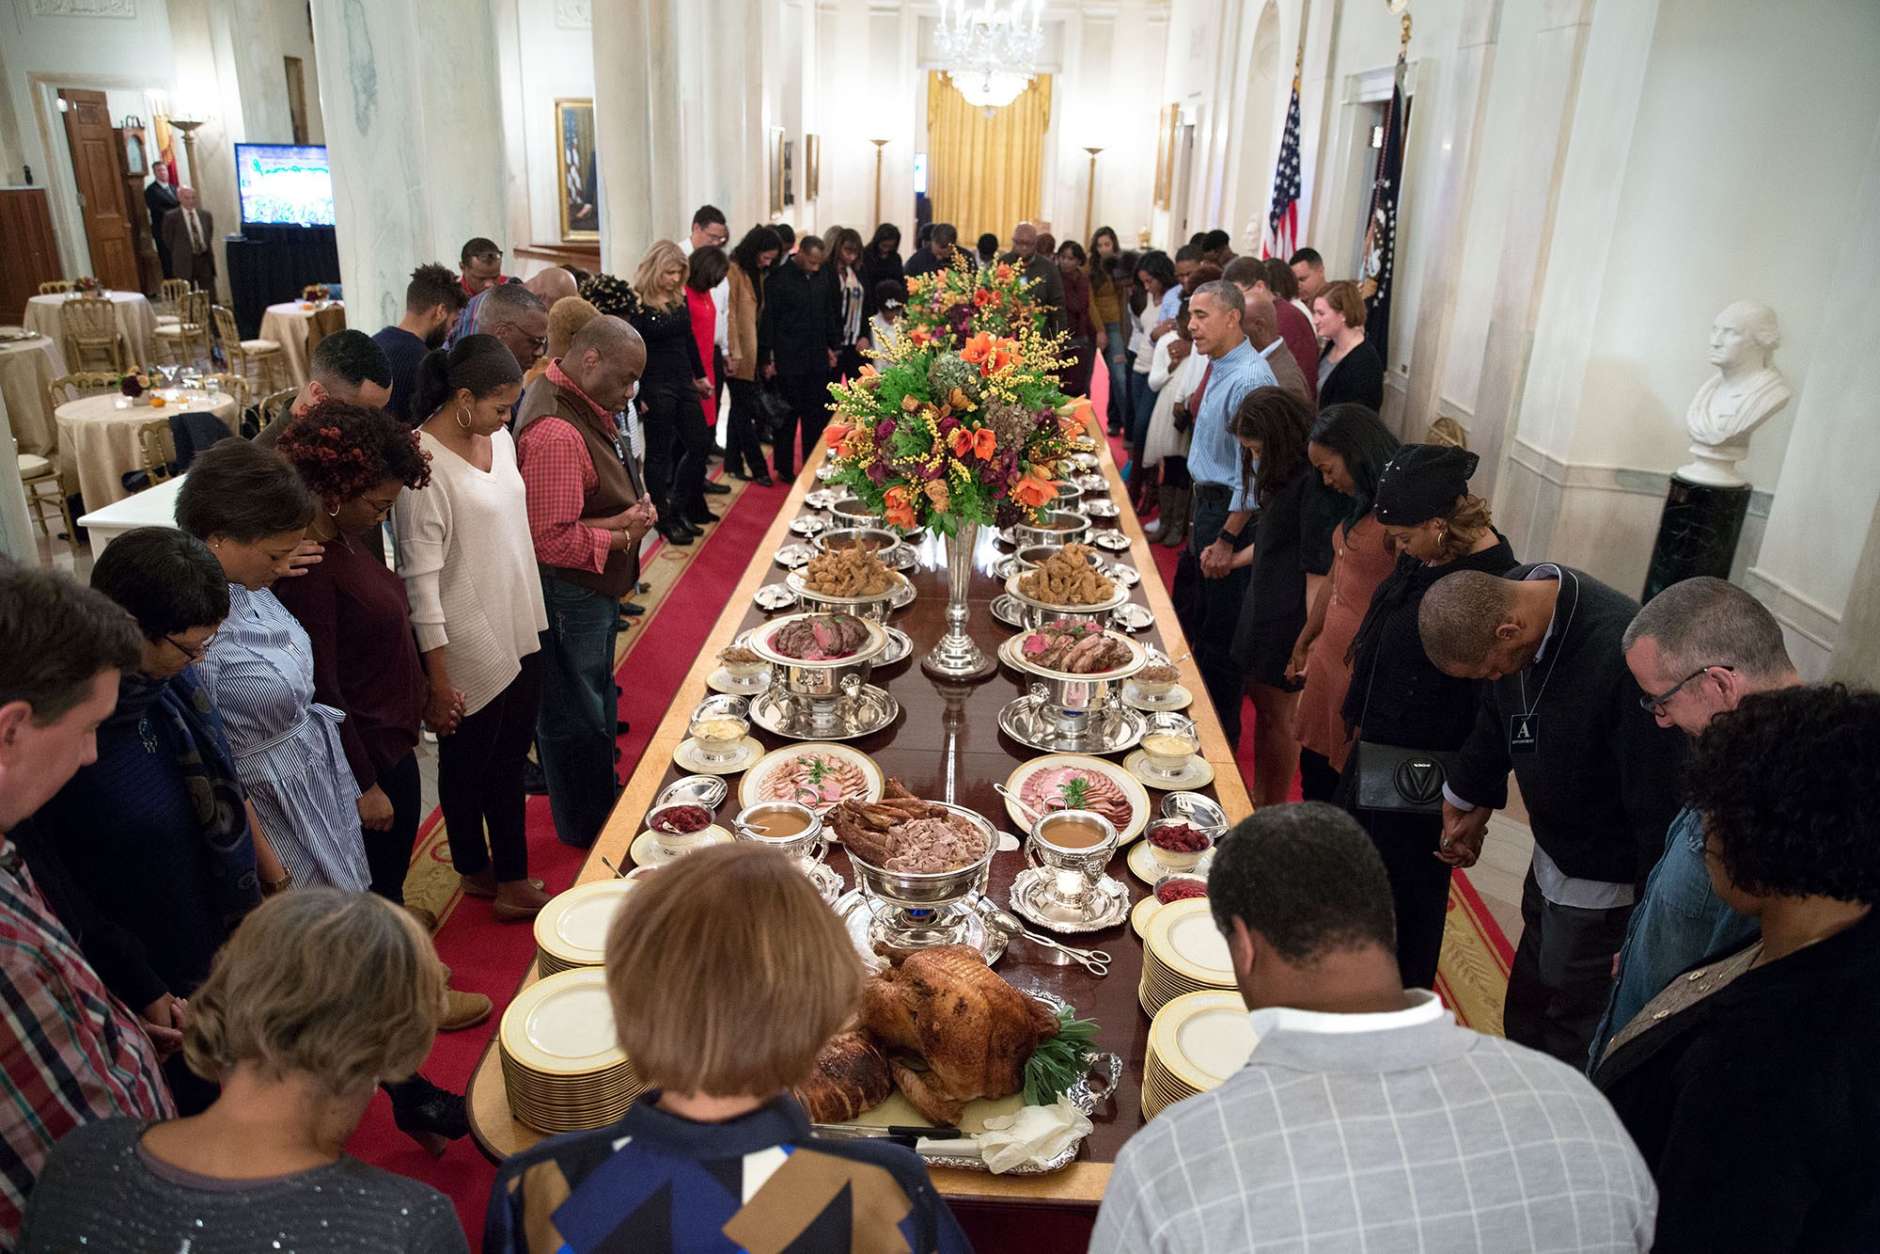 Nov. 24, 2016
“President Obama leads a prayer before hosting Thanksgiving dinner for family and friends on the State Floor of the White House.” (Official White House Photo by Pete Souza)